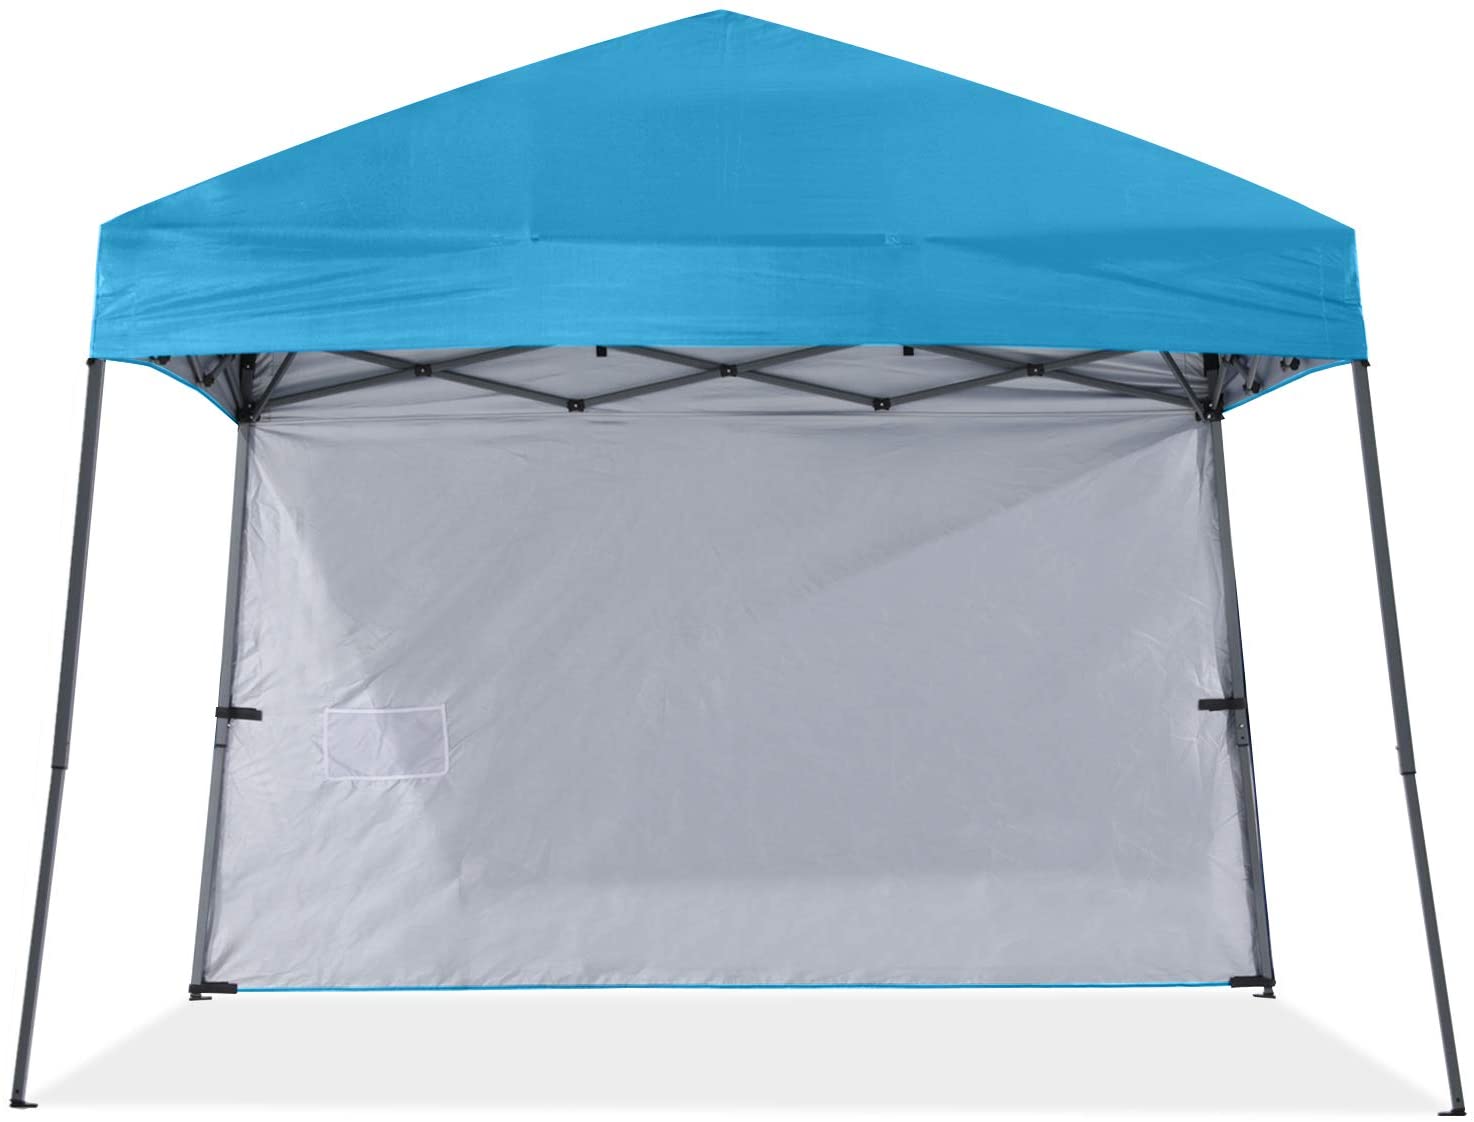 ABCCANOPY 8 ft x 8 ft Outdoor Pop up Slant Leg Canopy Tent with 1 Sun Wall and 1 Backpack Bag - Sky Blue